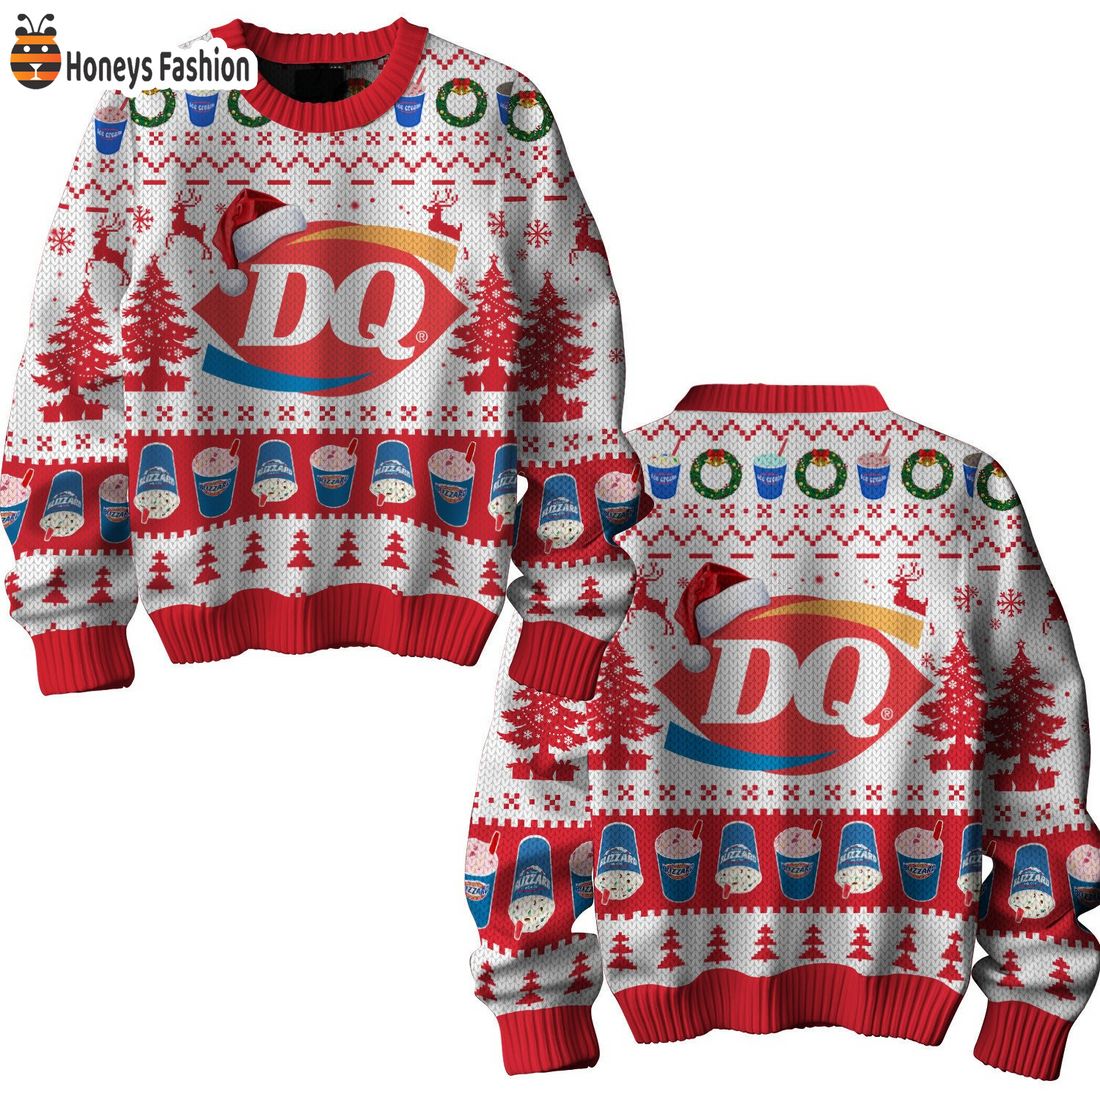 DQ Dairy Queen Ugly Christmas Sweater